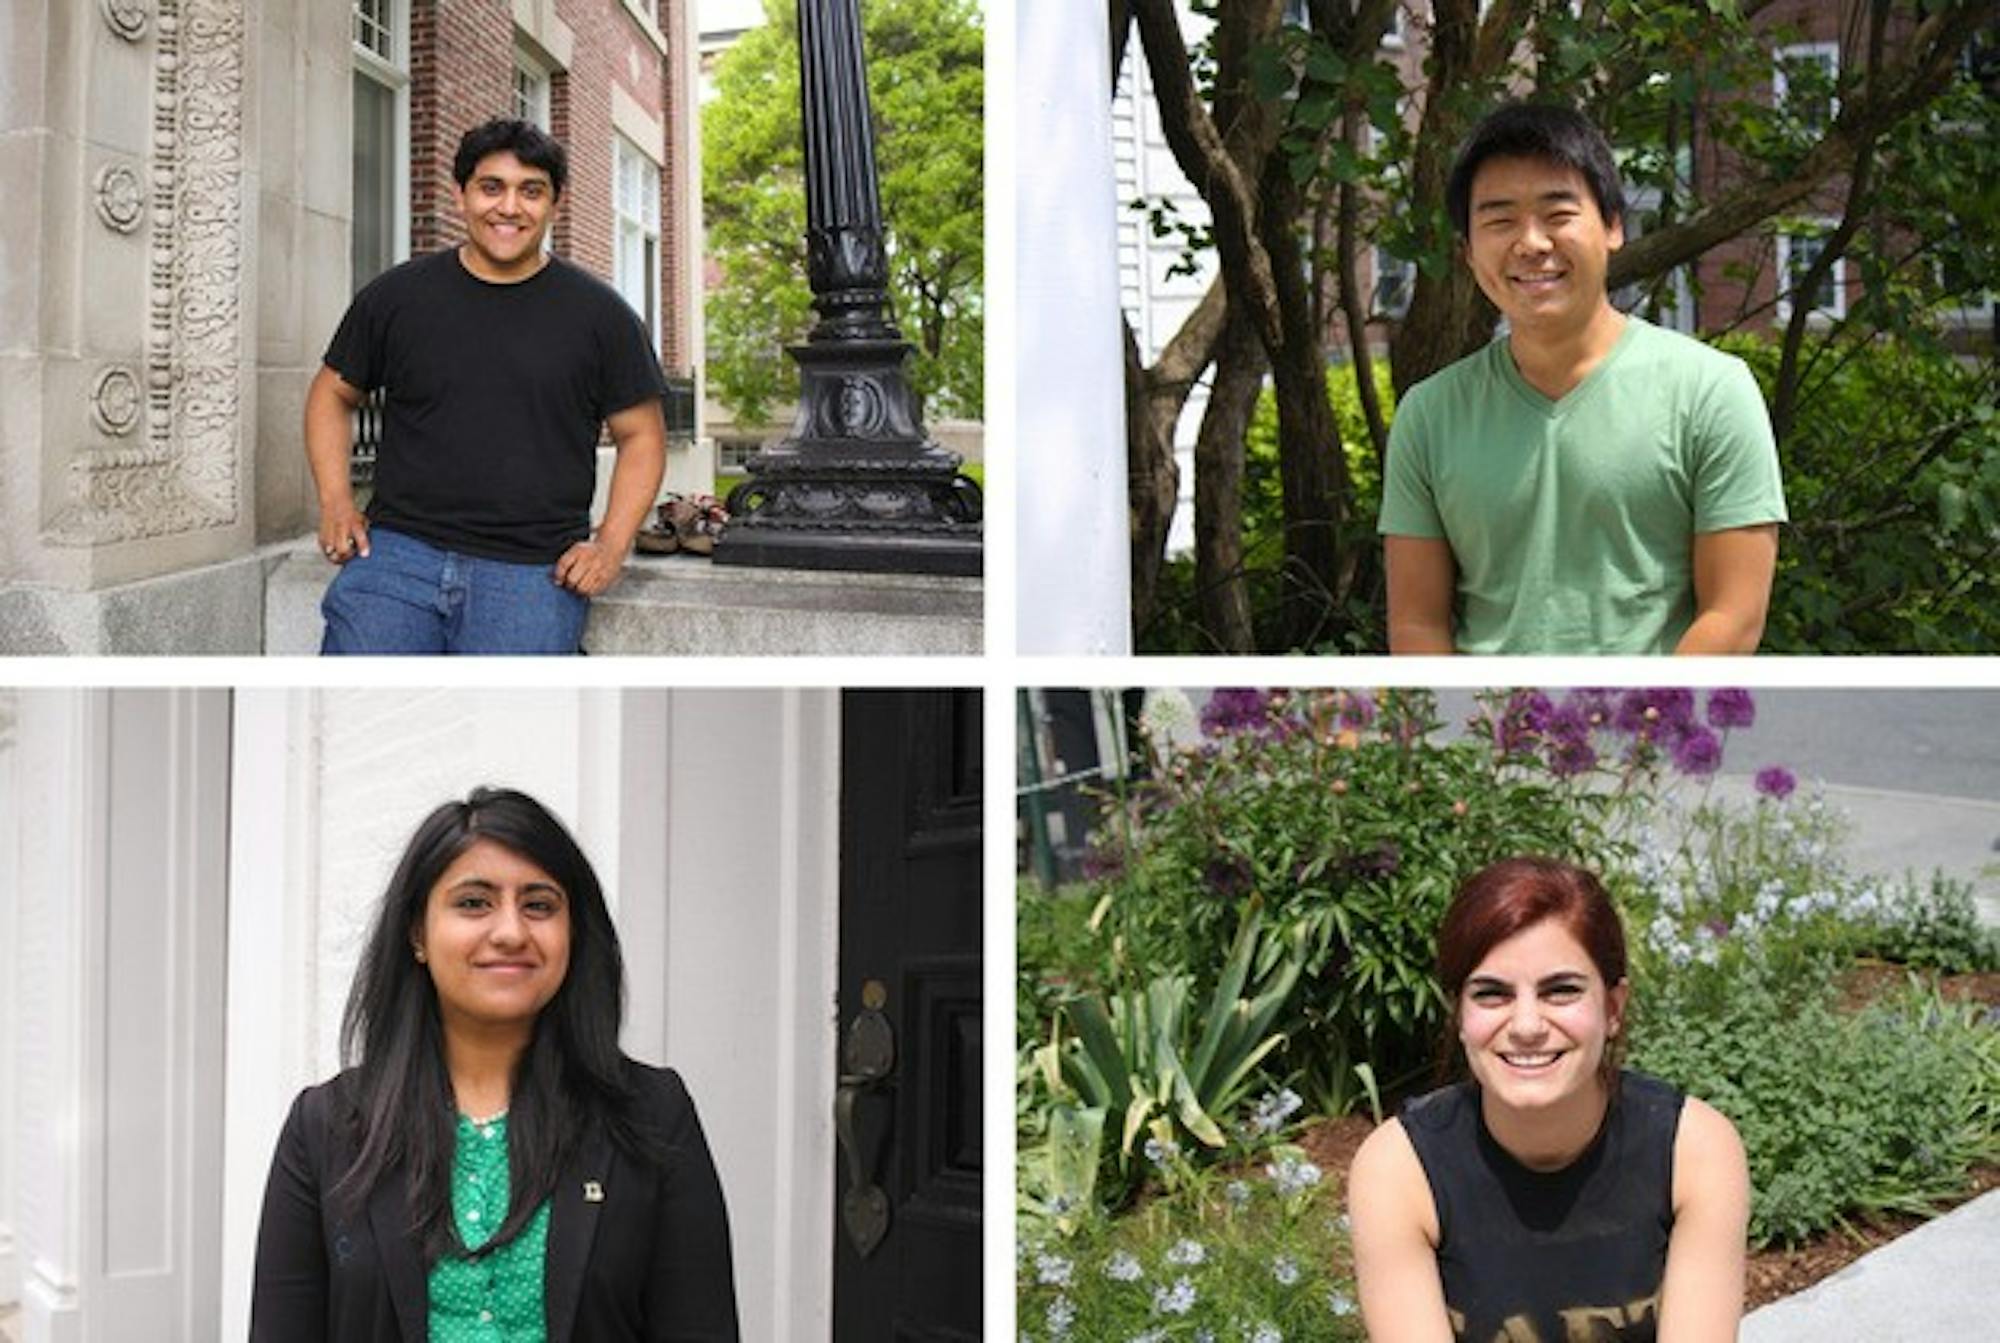 From helping build community among first-year students to taking the final bow in a self-directed play, members of the Class of 2013 followed diverse paths at Dartmouth.